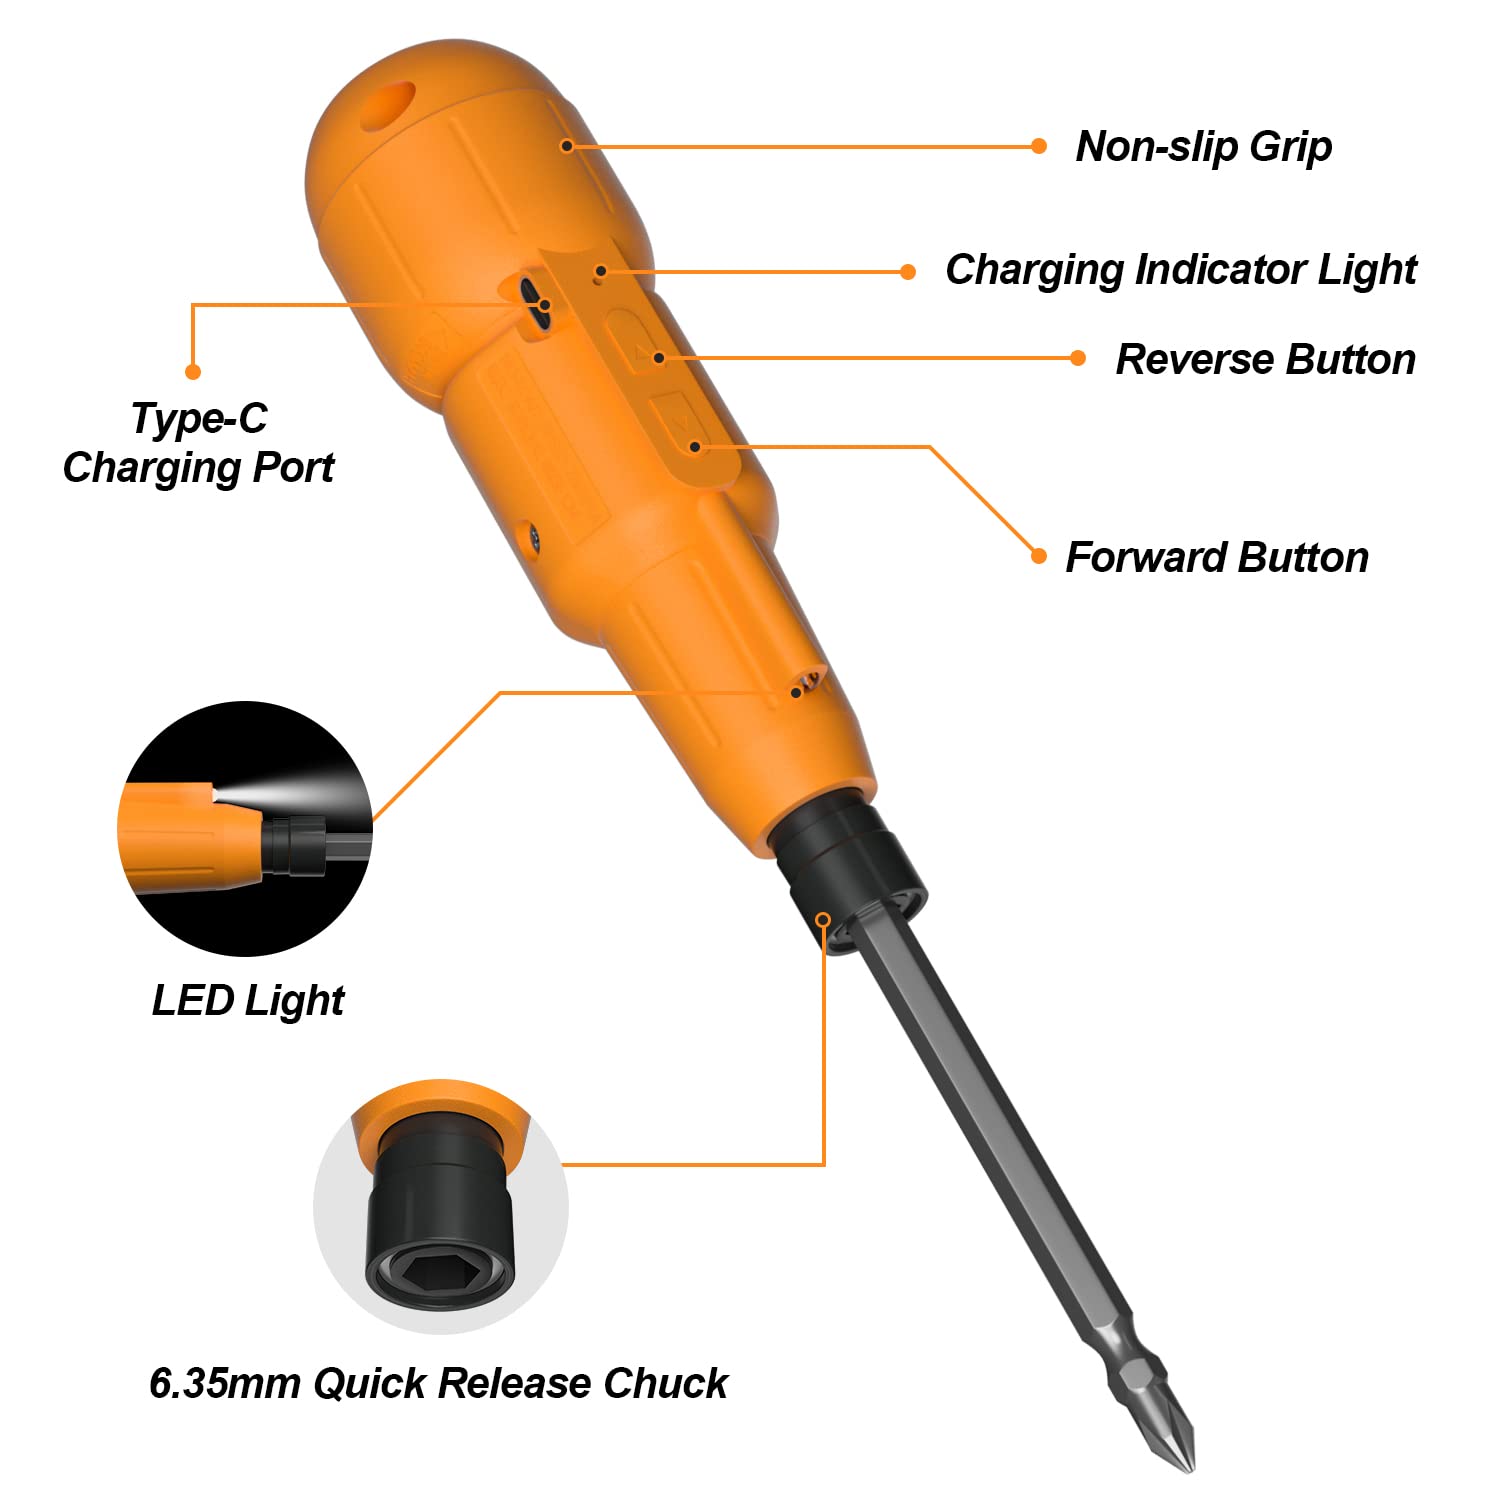 ERAVOR 3.6V Electric Screwdriver Cordless, Rechargeable Power Screwdrivers Set With Tool Bag, Cordless Screwdriver Tool Kit w/LED, 1/4" Hex Magnetic Bit Holder, Automatic Manual Use for Home Repairs